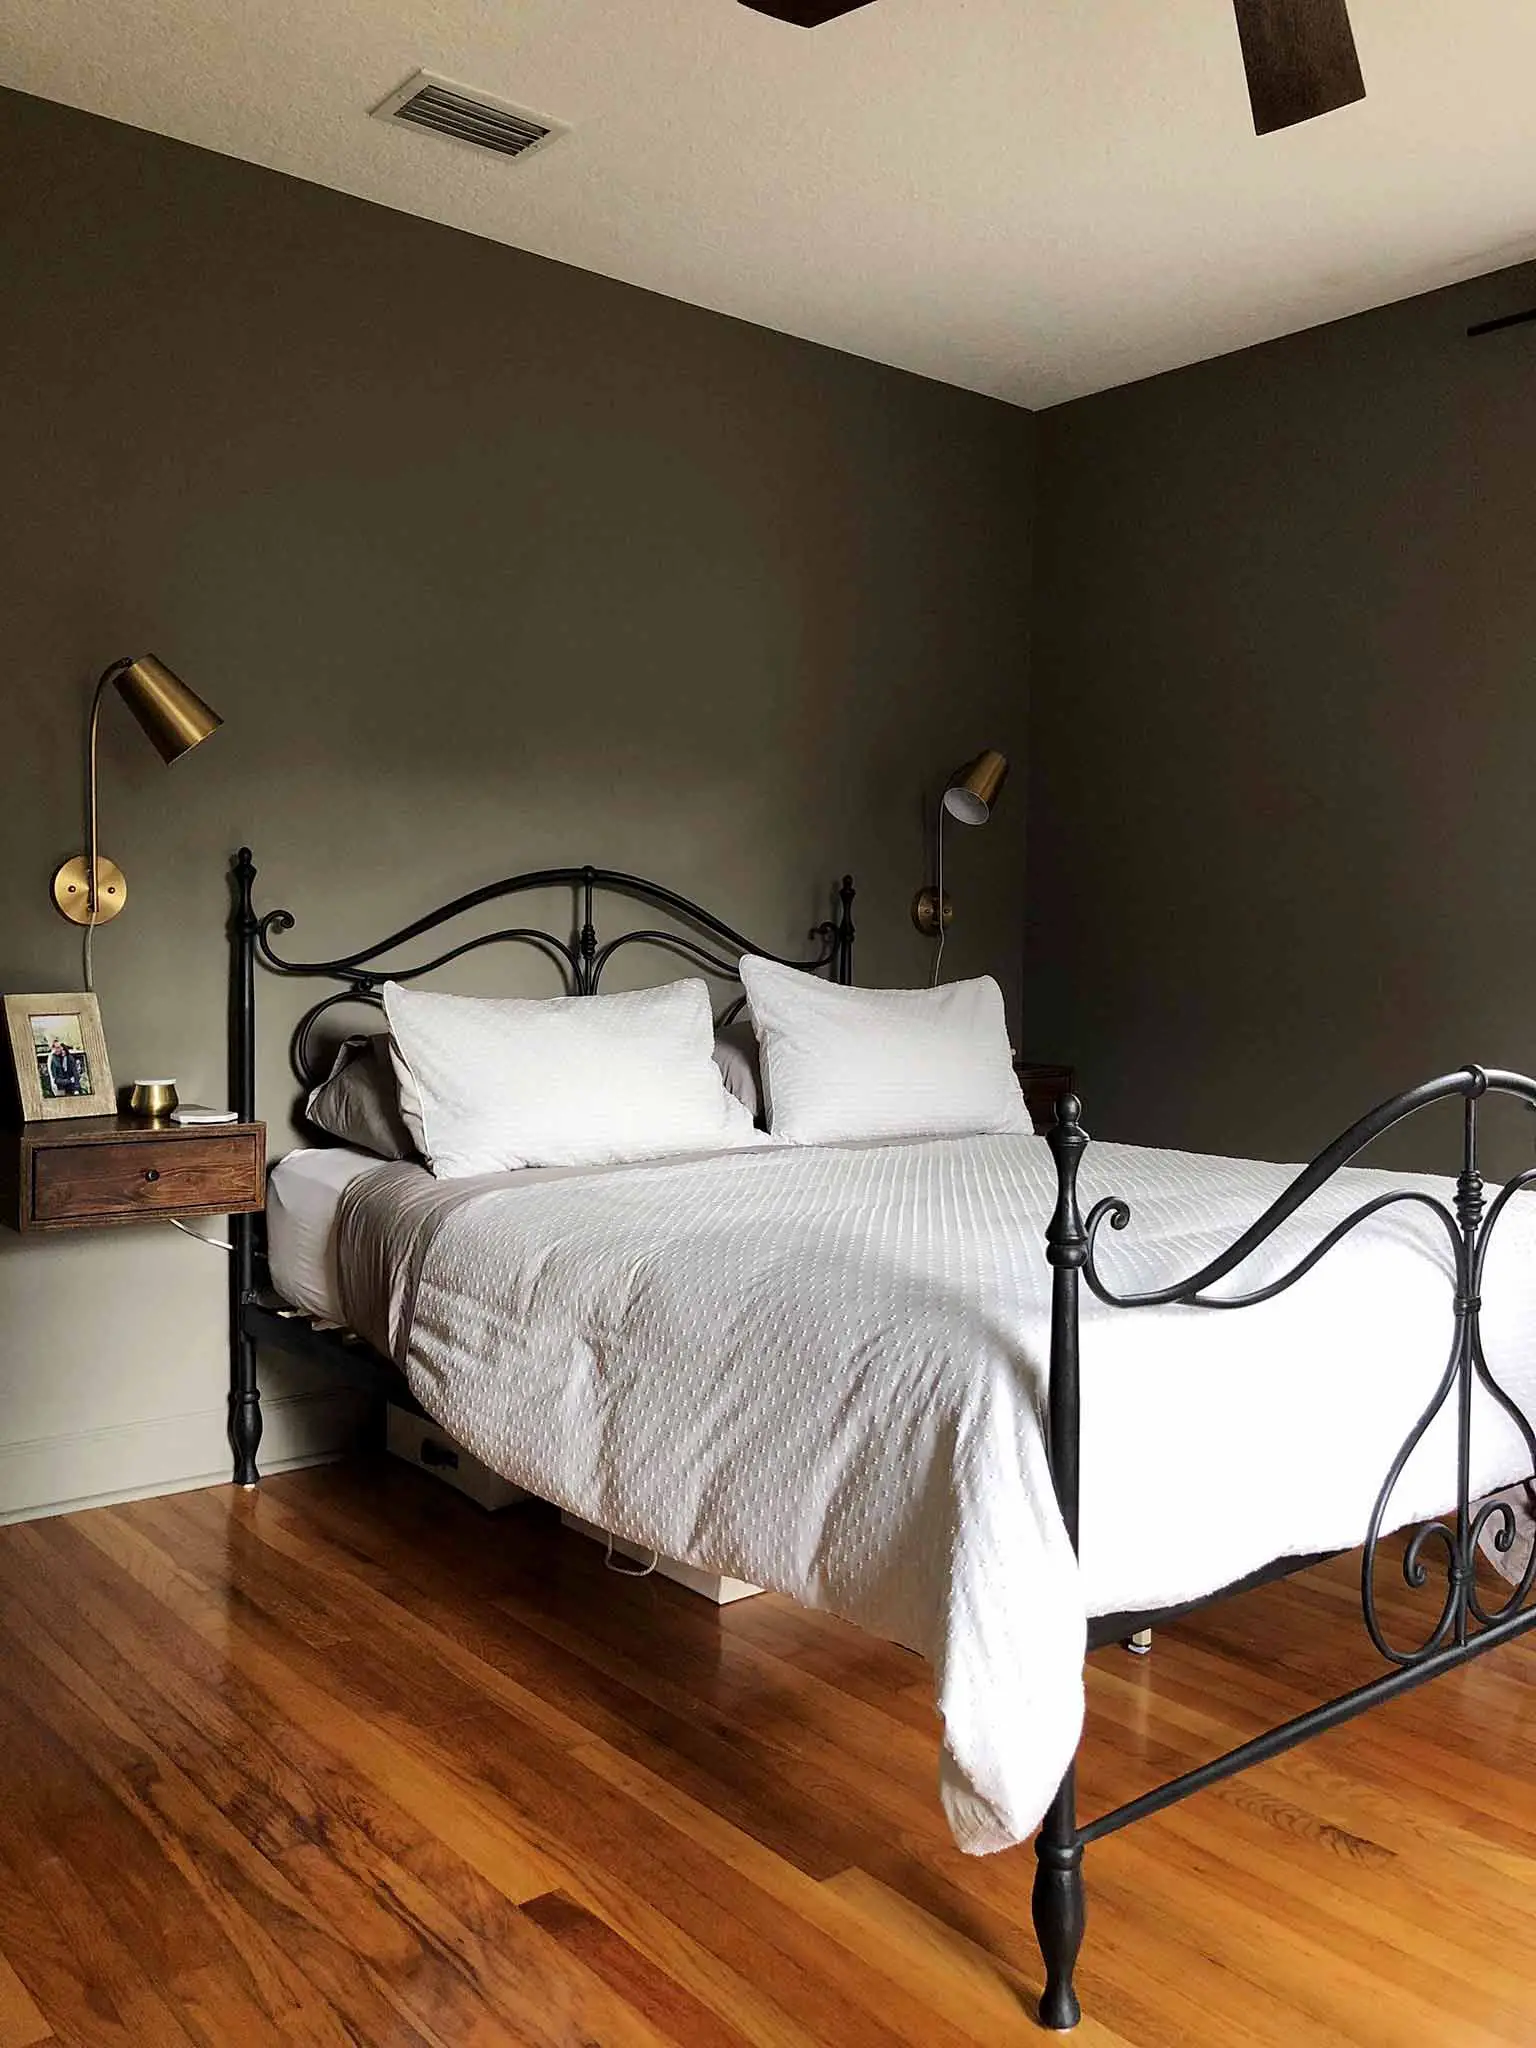 Master Bedroom Progress floating nightstands and wall mounted lamps - The One Room Challenge - That Homebird Life Blog